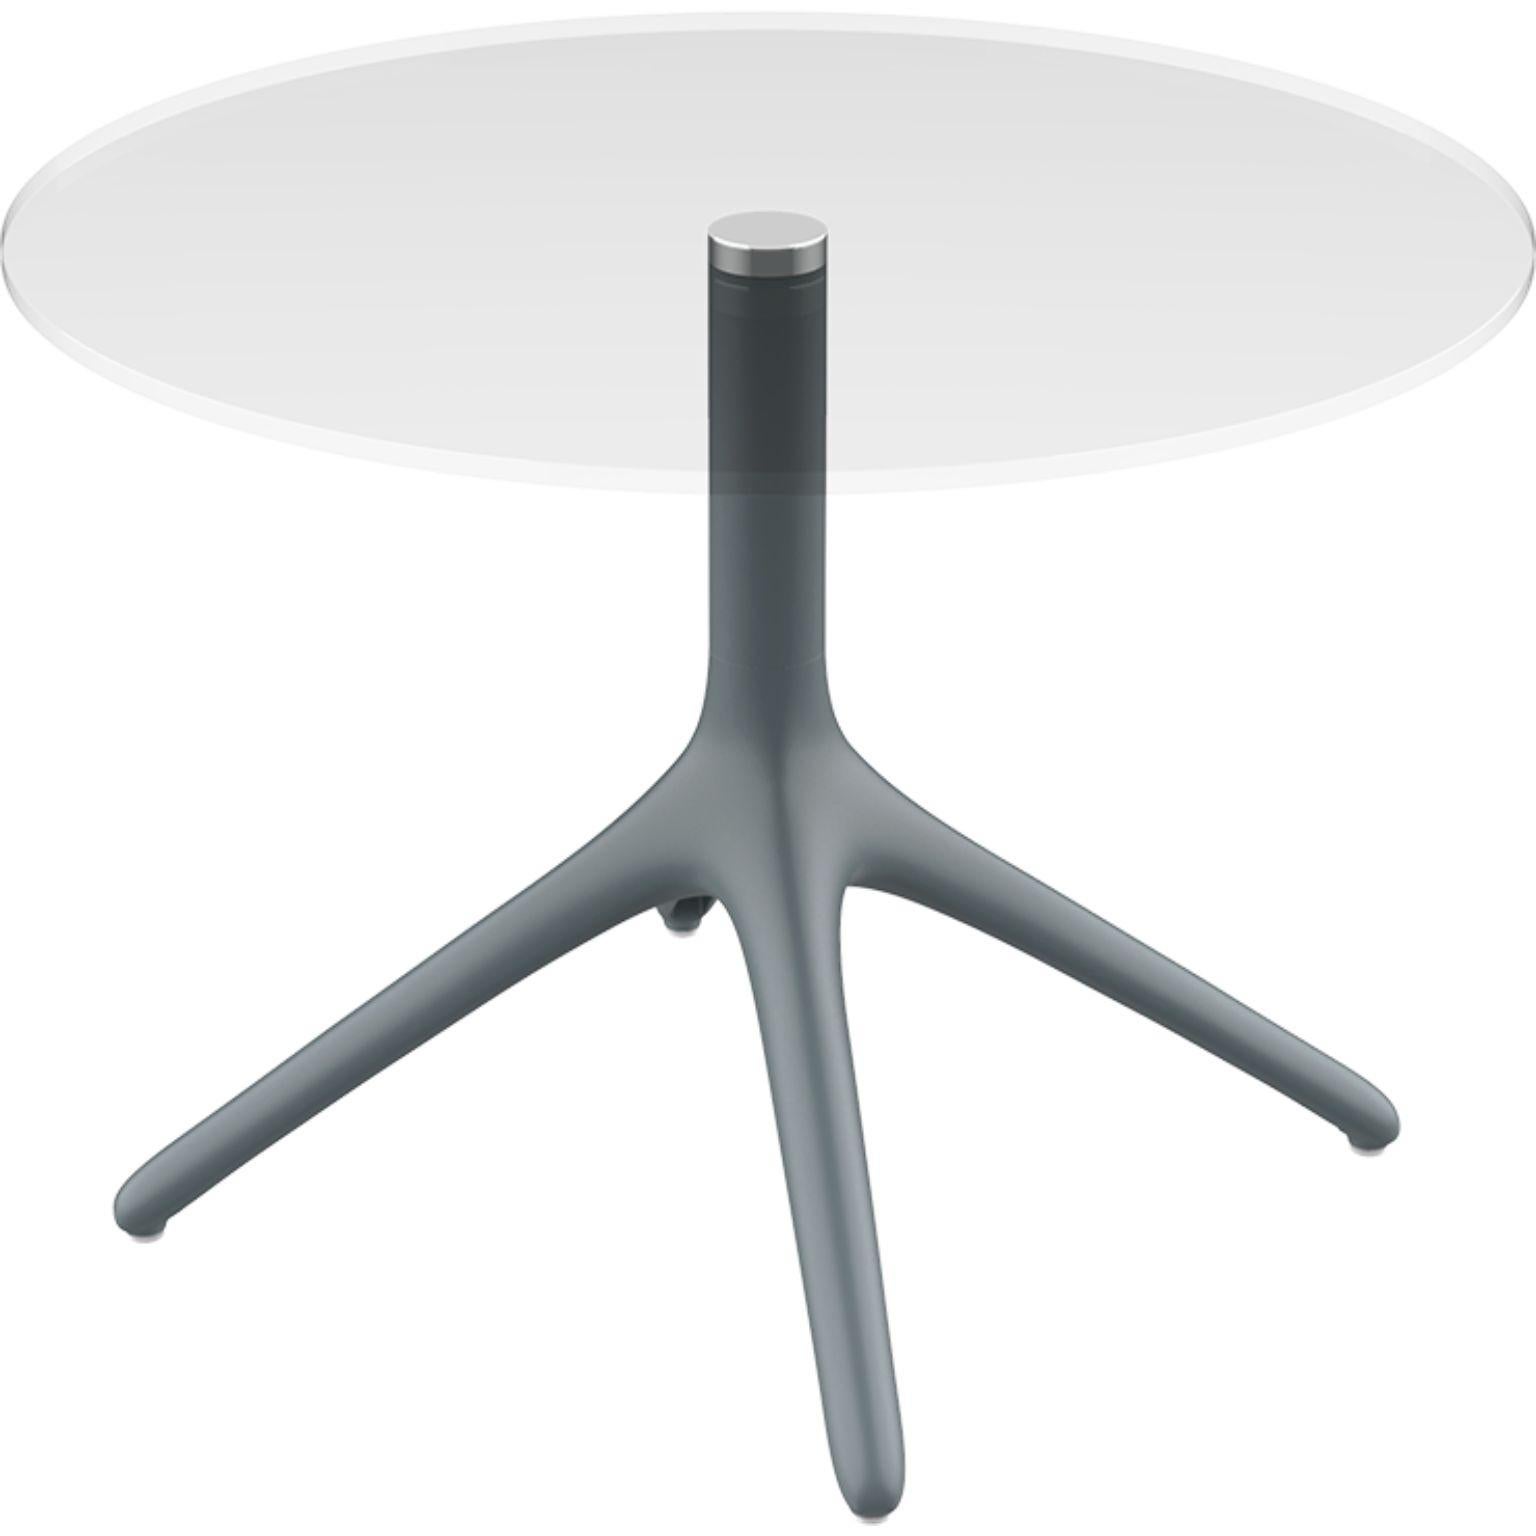 Uni grey table 50 by Mowee.
Dimensions: D45.5 x H50 cm.
Material: Aluminium, tempered glass.
Weight: 5 kg
Also Available in different colours and finishes. Collapsable version available. 

A table designed to be as versatile as possible and